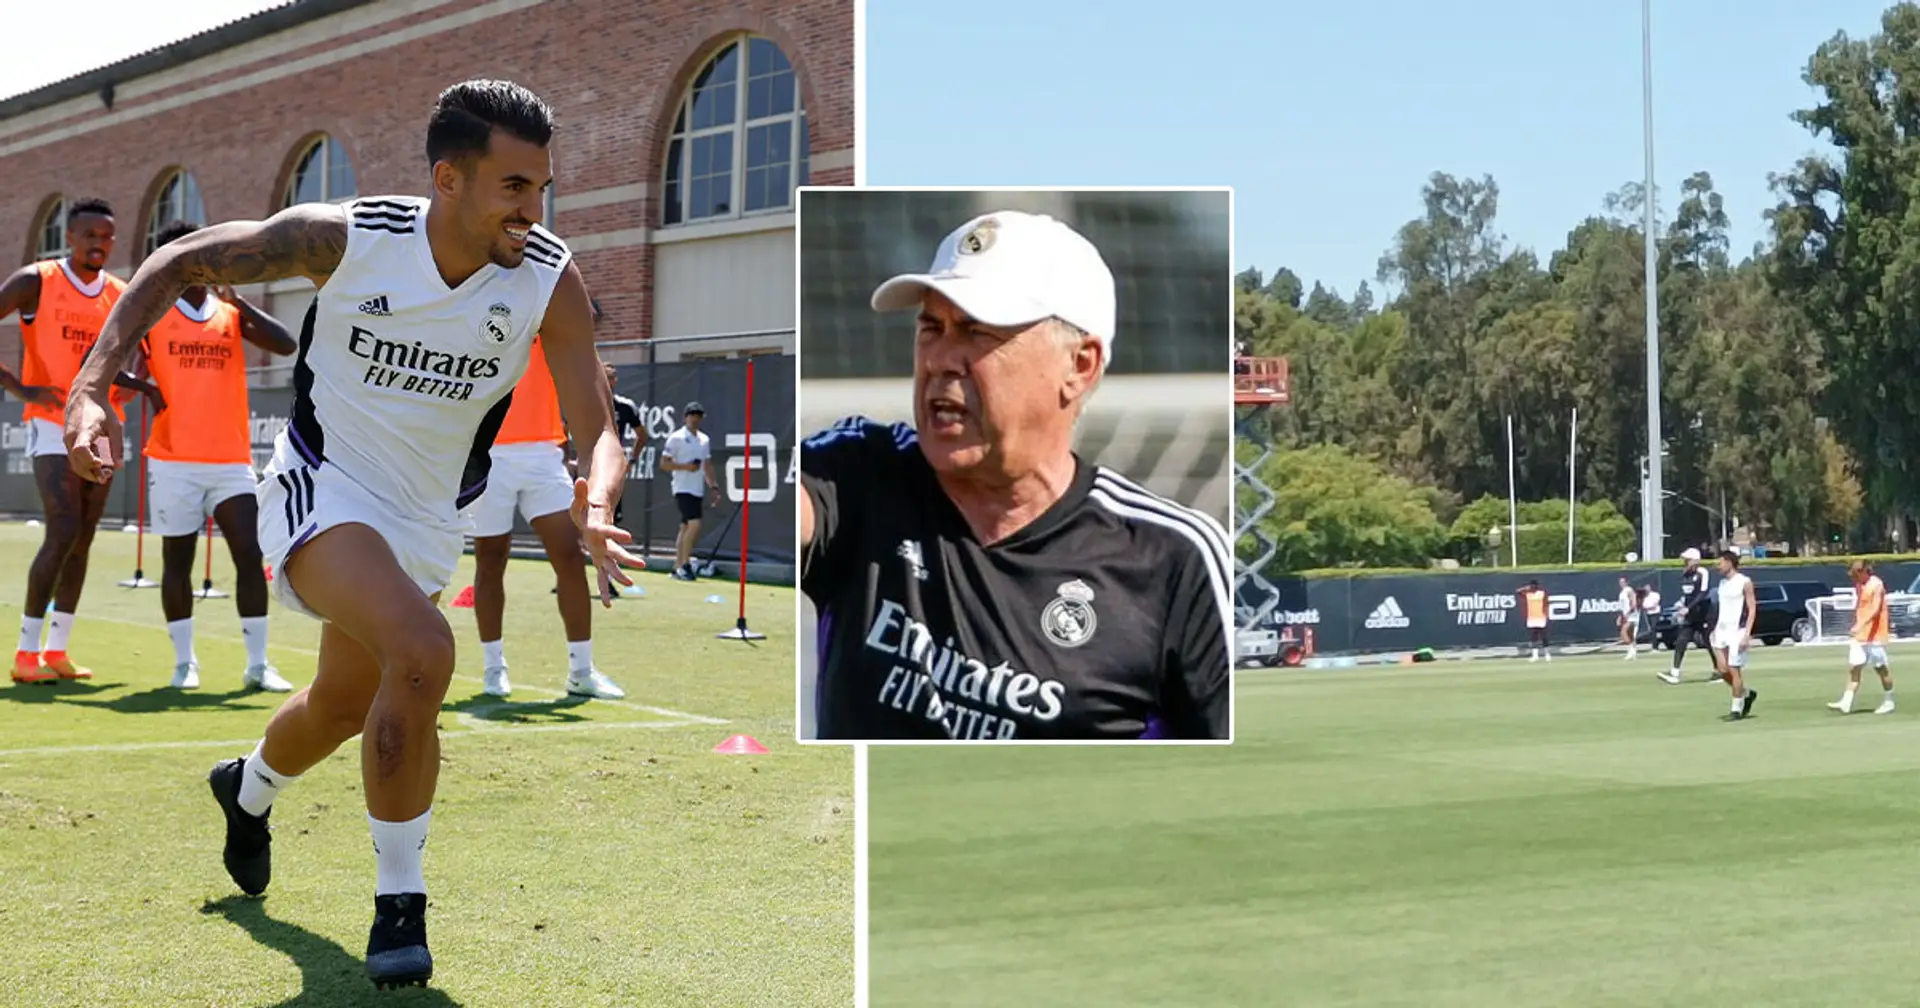 Lineups, goalscorers and more as Real Madrid play intersquad training match